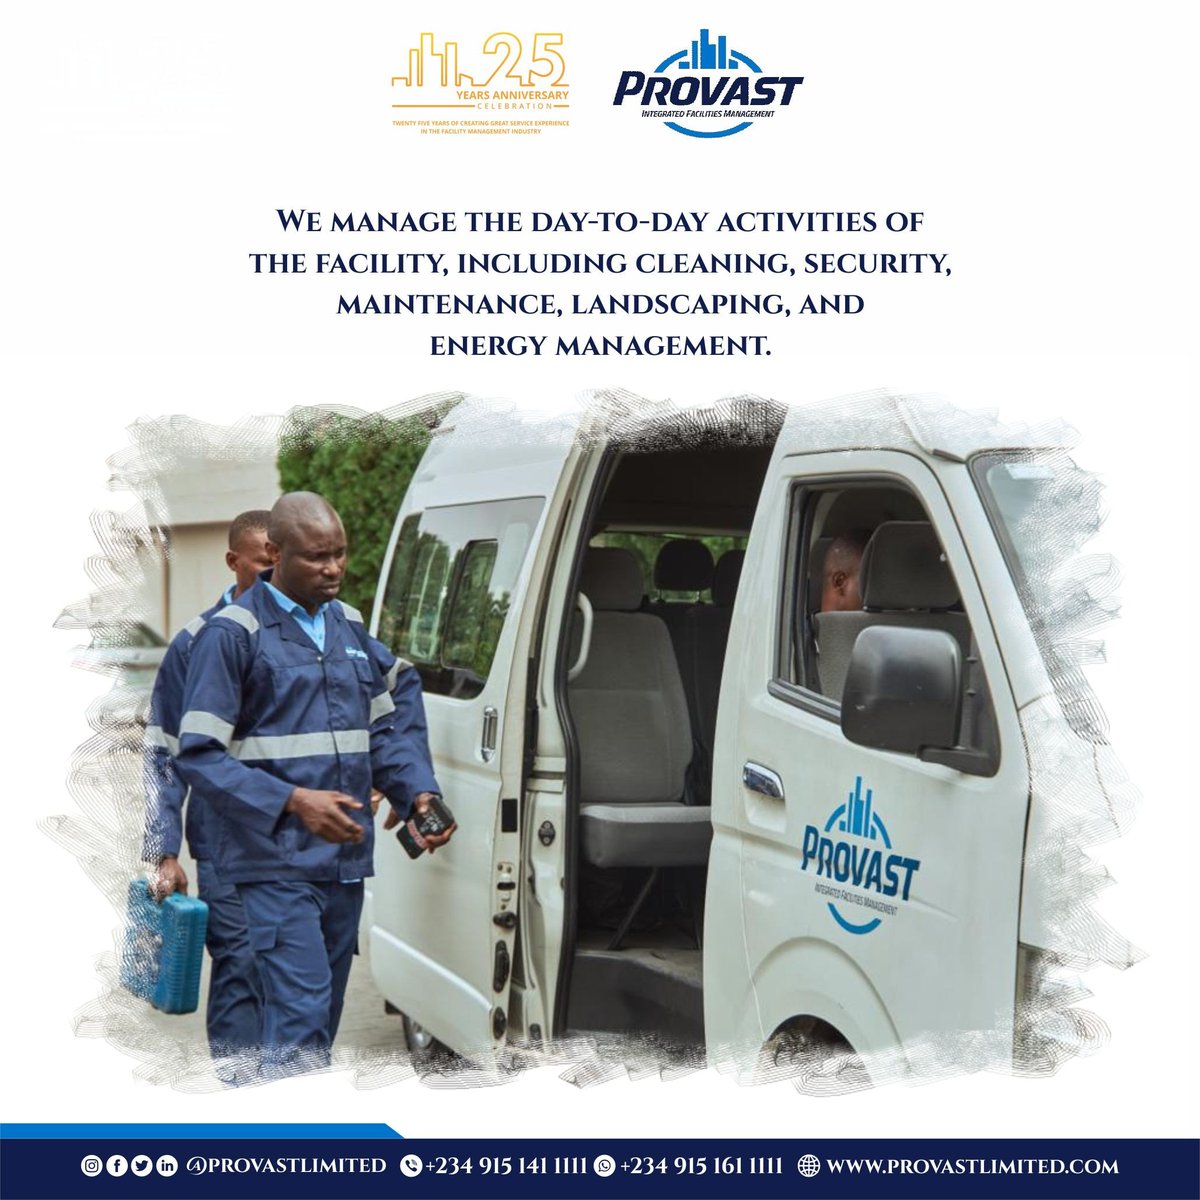 With Provast , your facilities are in good hands.

#provastltd #facilities #facilityservices #facilitymanagement #facilitiesmanagement #buildingmanagement #hospitalityfacilities #propertymanagementservices #commercialfacilities #schoolfacilities